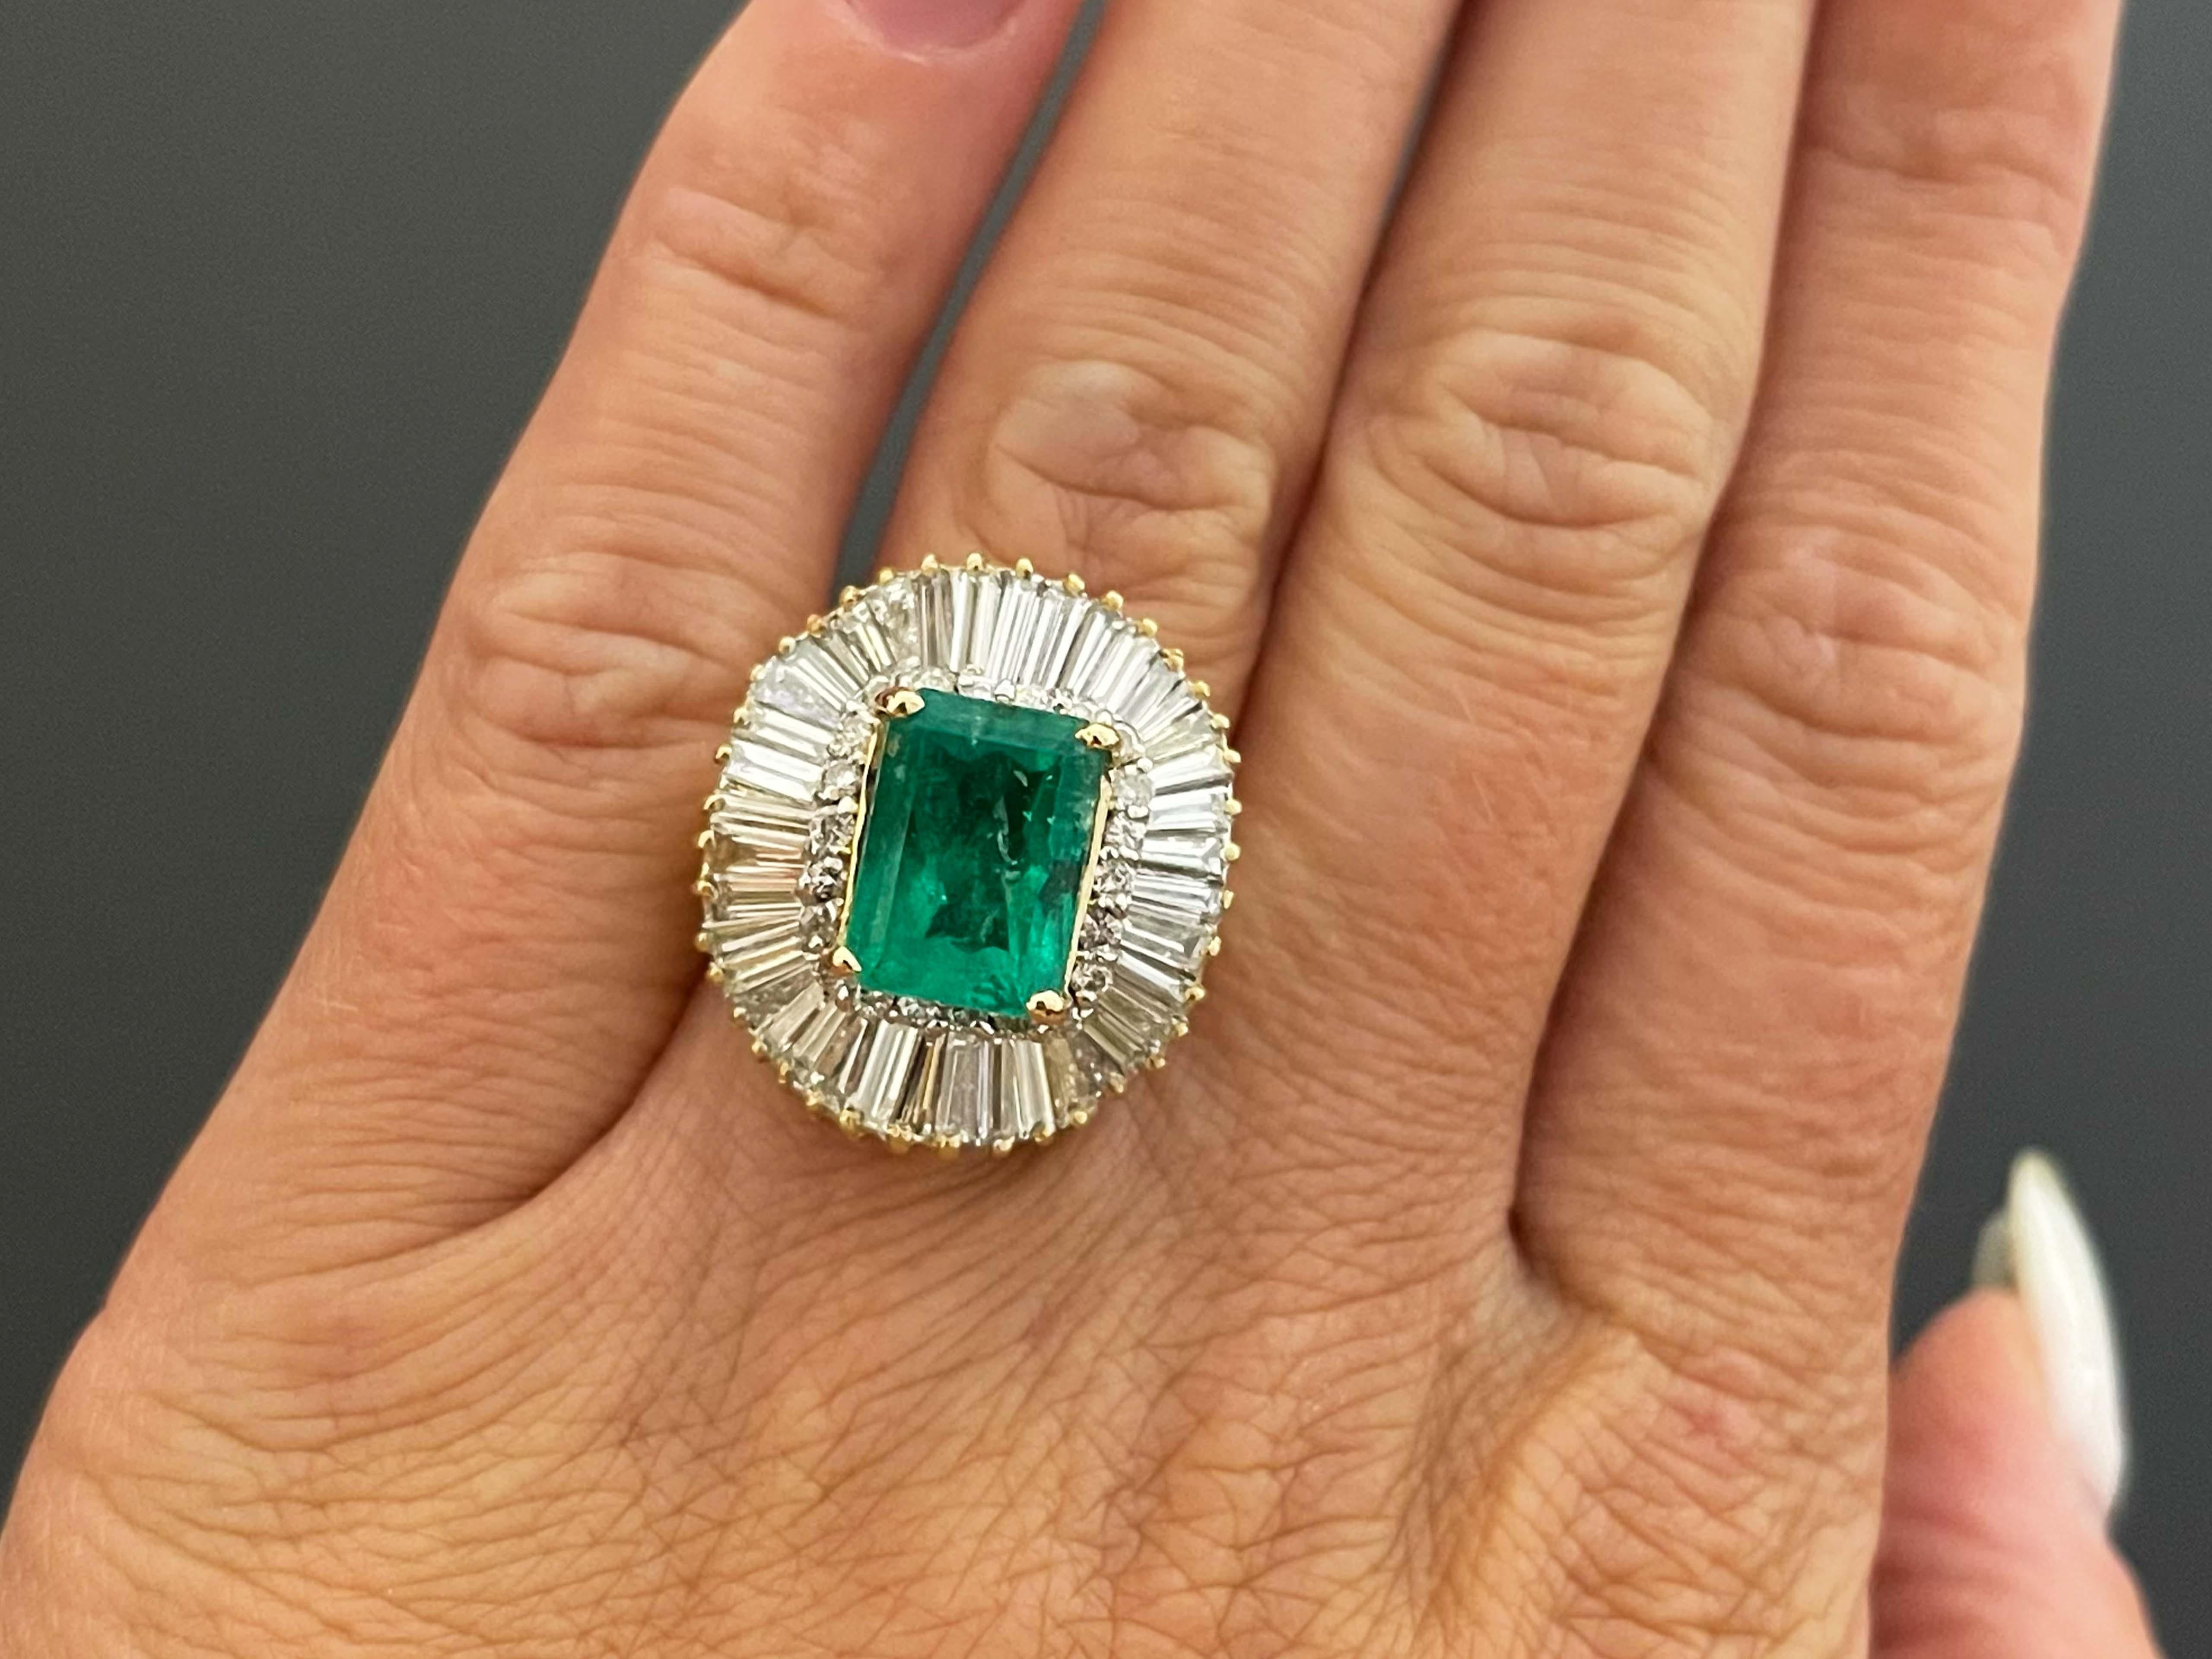 GIA Rare 4 ct. Colombian Emerald & Diamond Ballerina Ring in 18k Yellow Gold. This stunning ring features a 4 carat octagonal, step cut, transparent green Colombian Emerald, surrounded by a gorgeous double diamond halo. The Colombian Emerald is